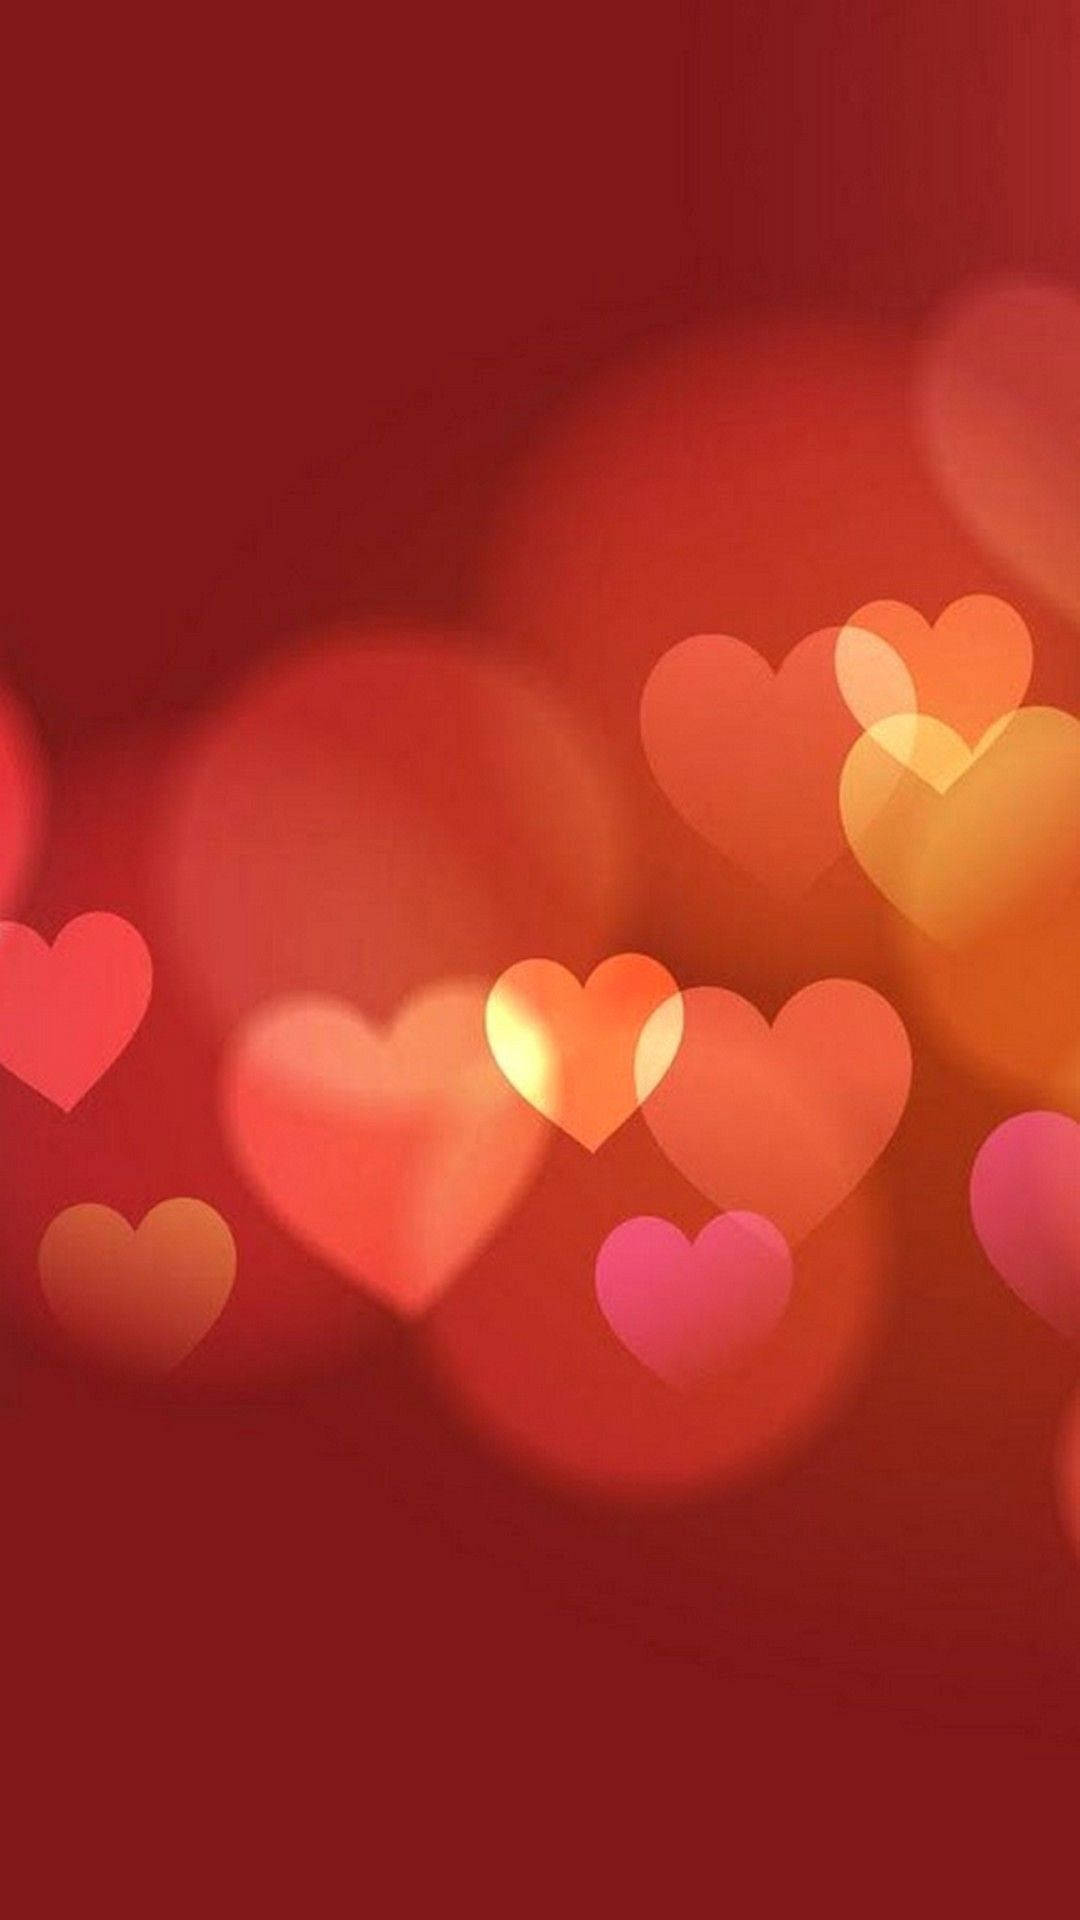 Caption: Radiant Heart On A Red Background For Iphone Display Wallpaper